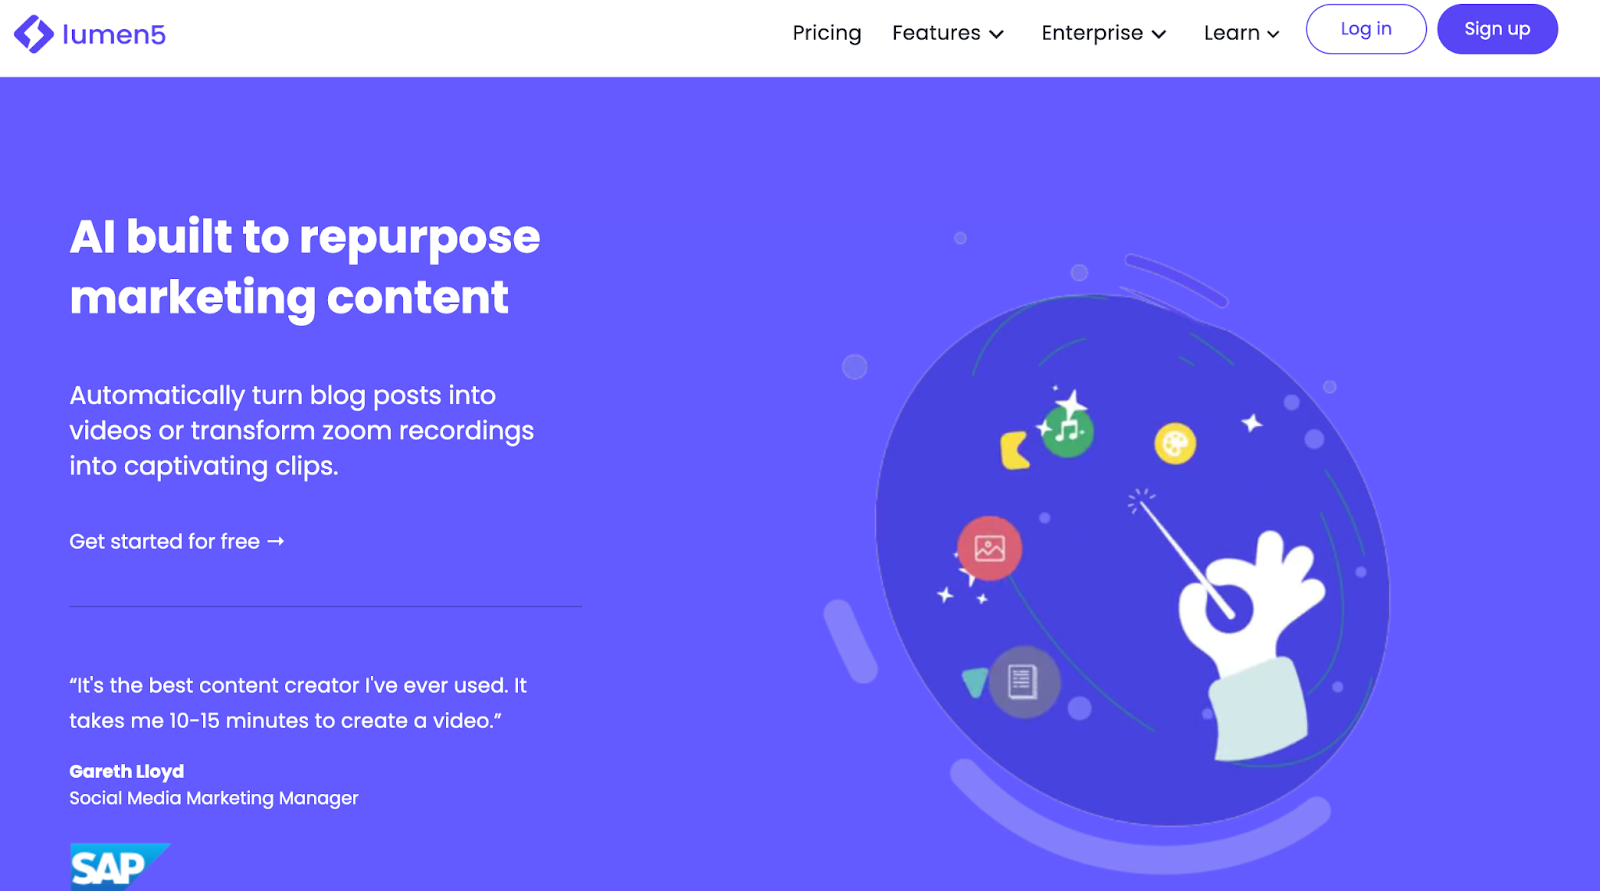 Lumen5 screenshot from the website with the heading "AI built to repurpose marketing content".